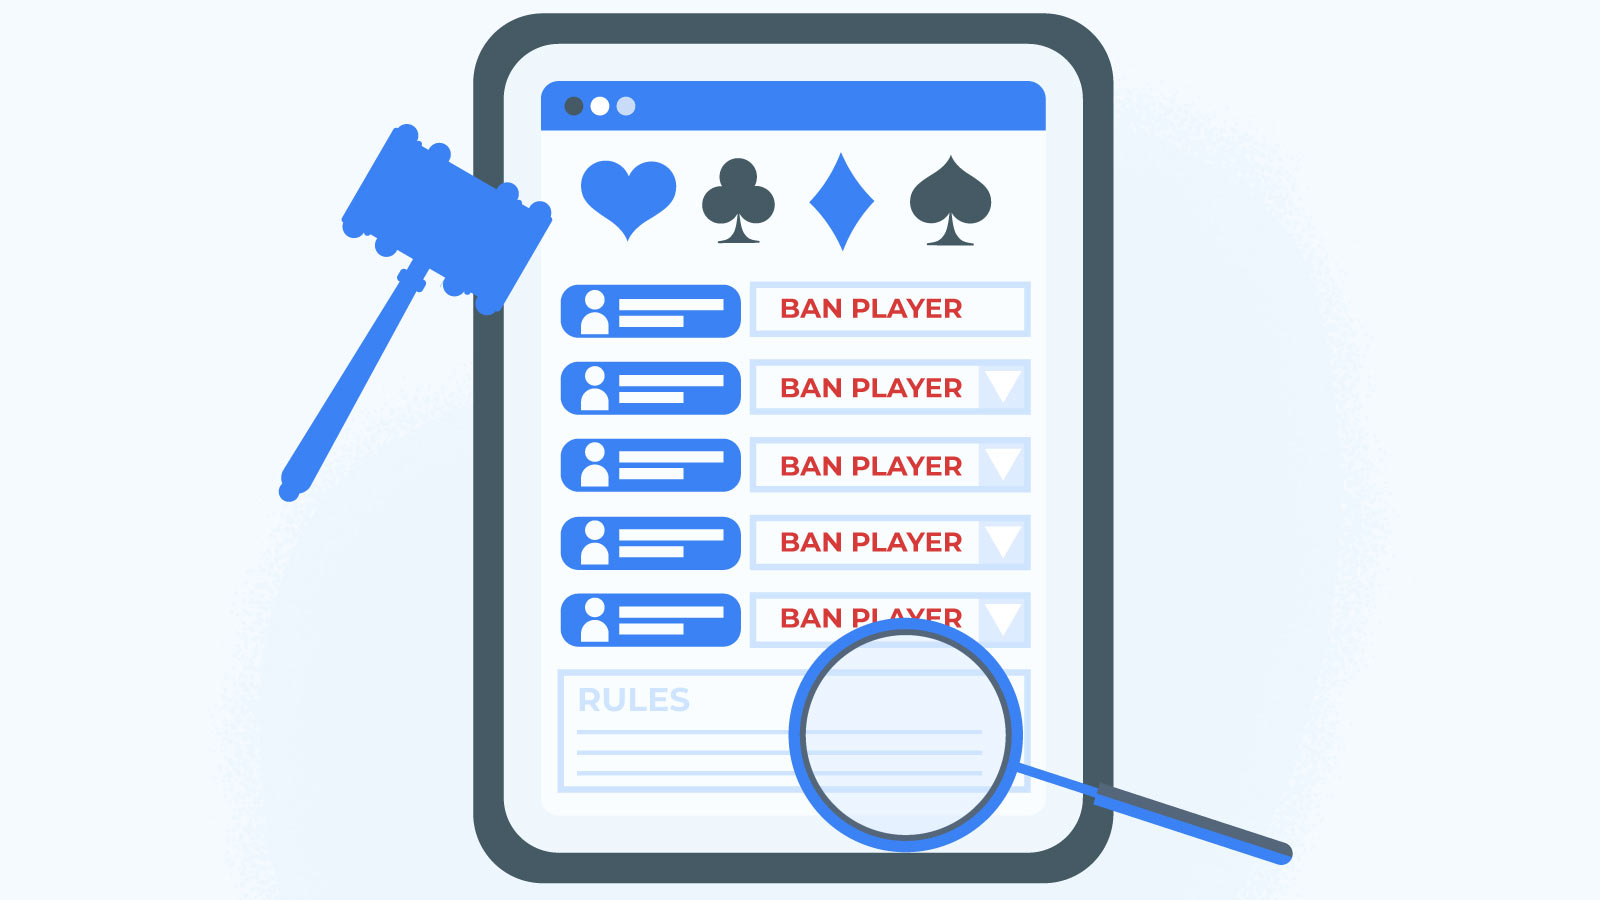 Is it legal for a casino to ban players